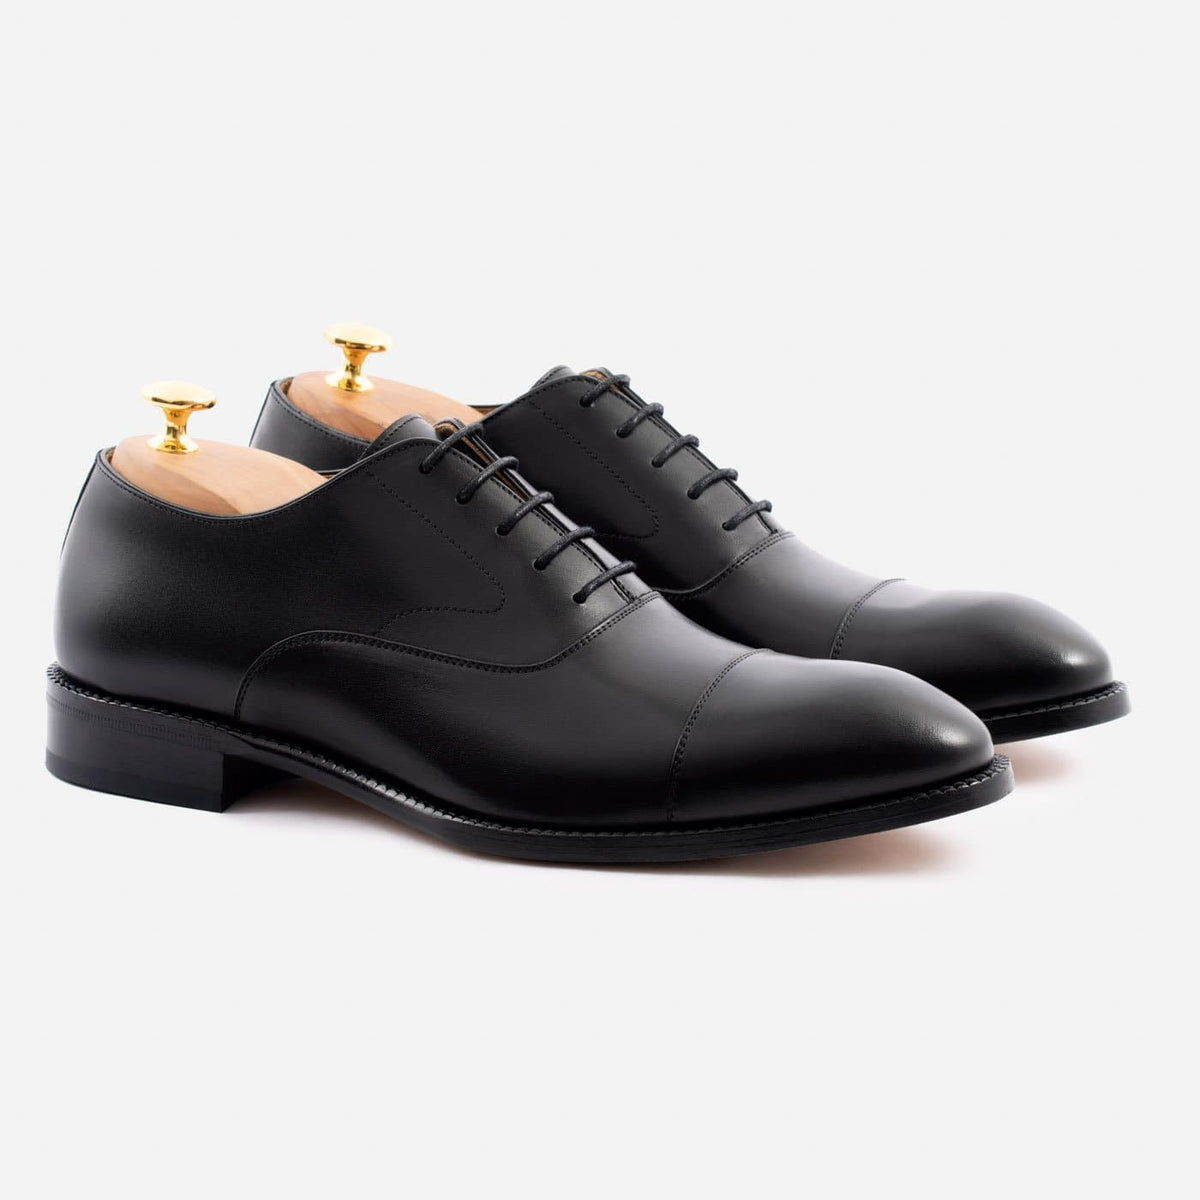 all black oxford shoes